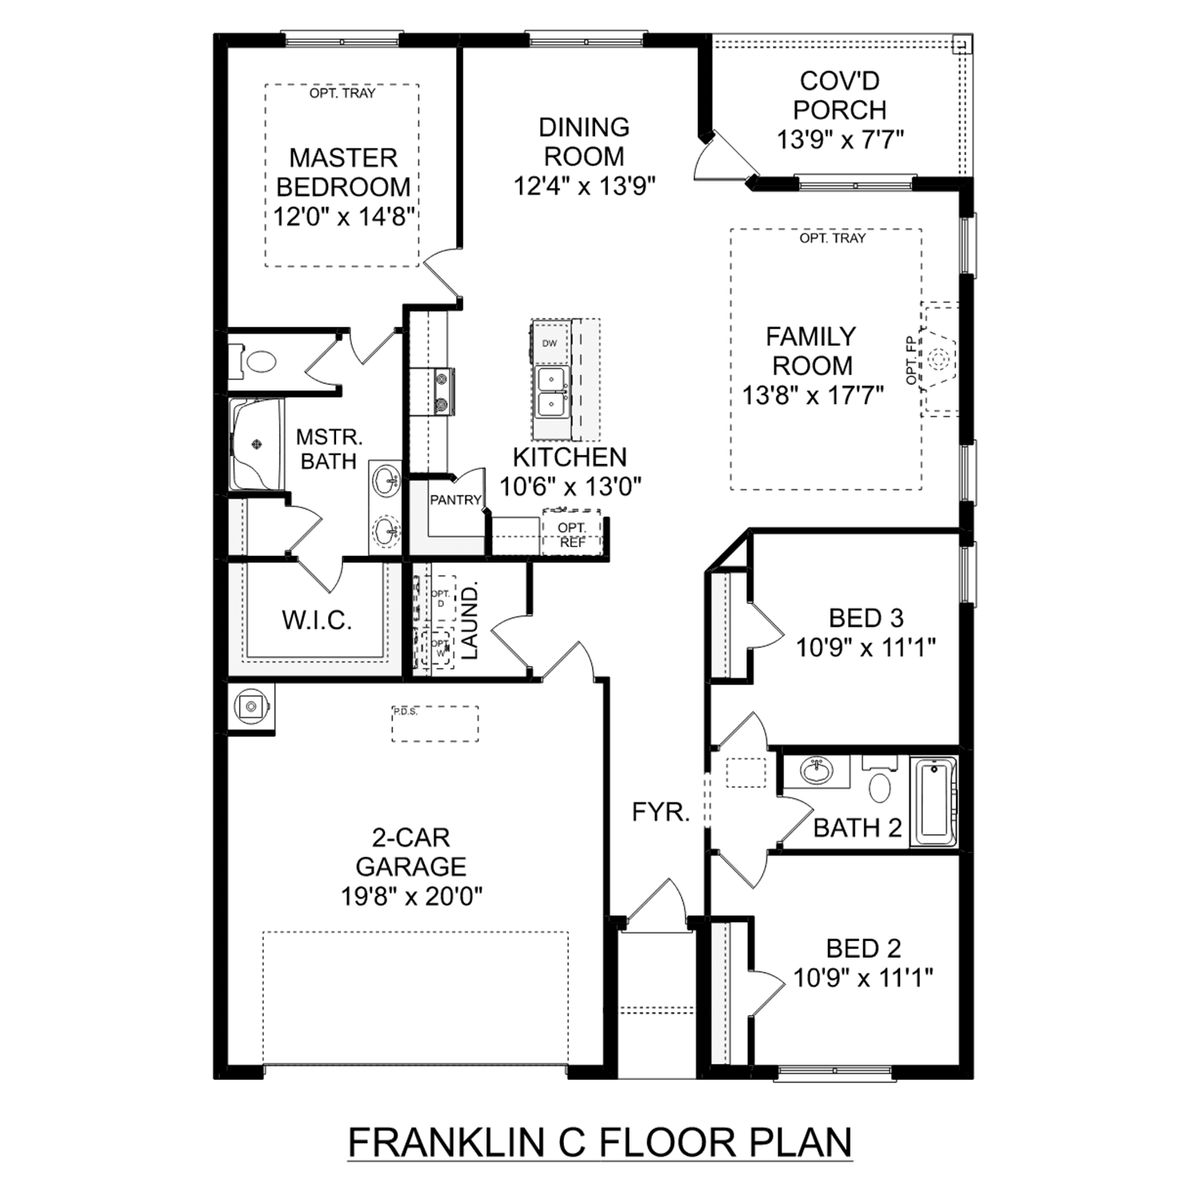 1 - The Franklin C floor plan layout for 14392 Harvest Ridge Lane in Davidson Homes' The Meadows community.